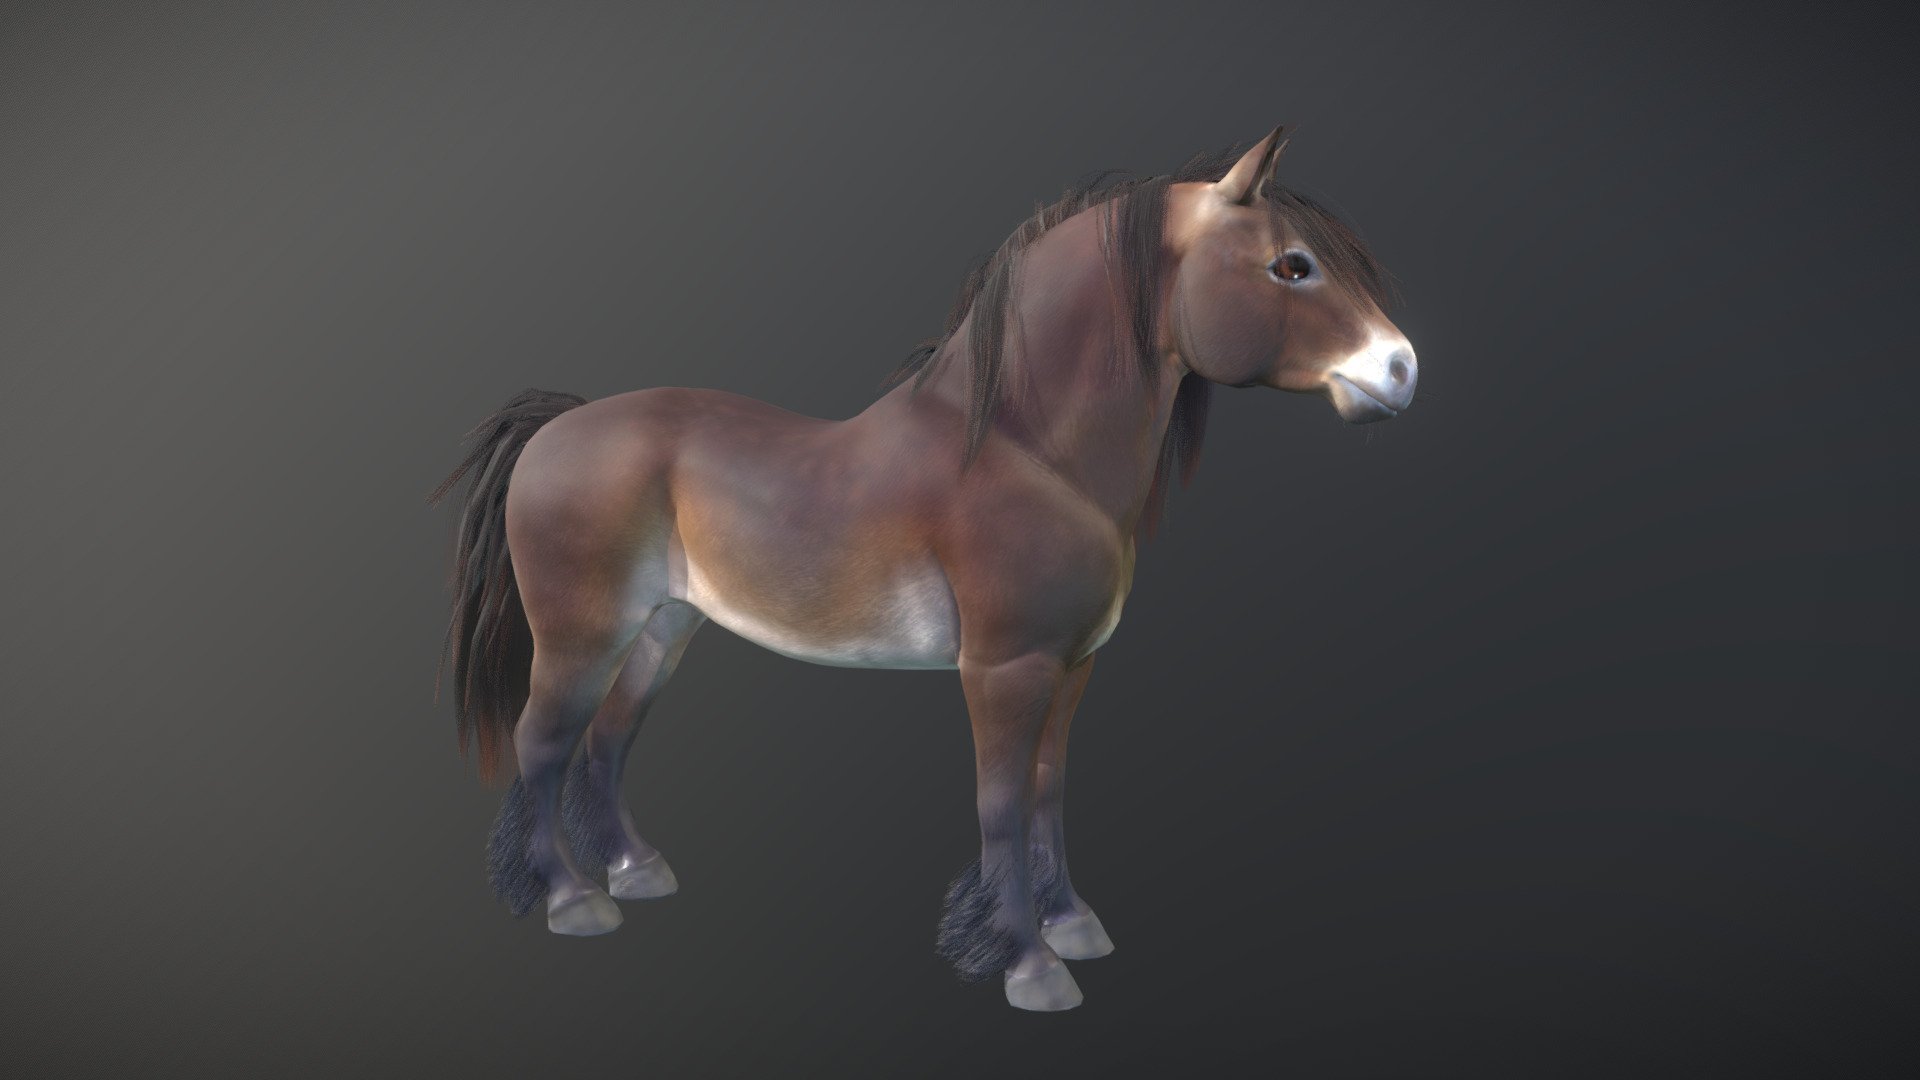 My first work with Substance Painter and also my first groom ever. Took me several months to do it properly or at least to get something that please me. 
I wanted to do something less &ldquo;low poly-ish